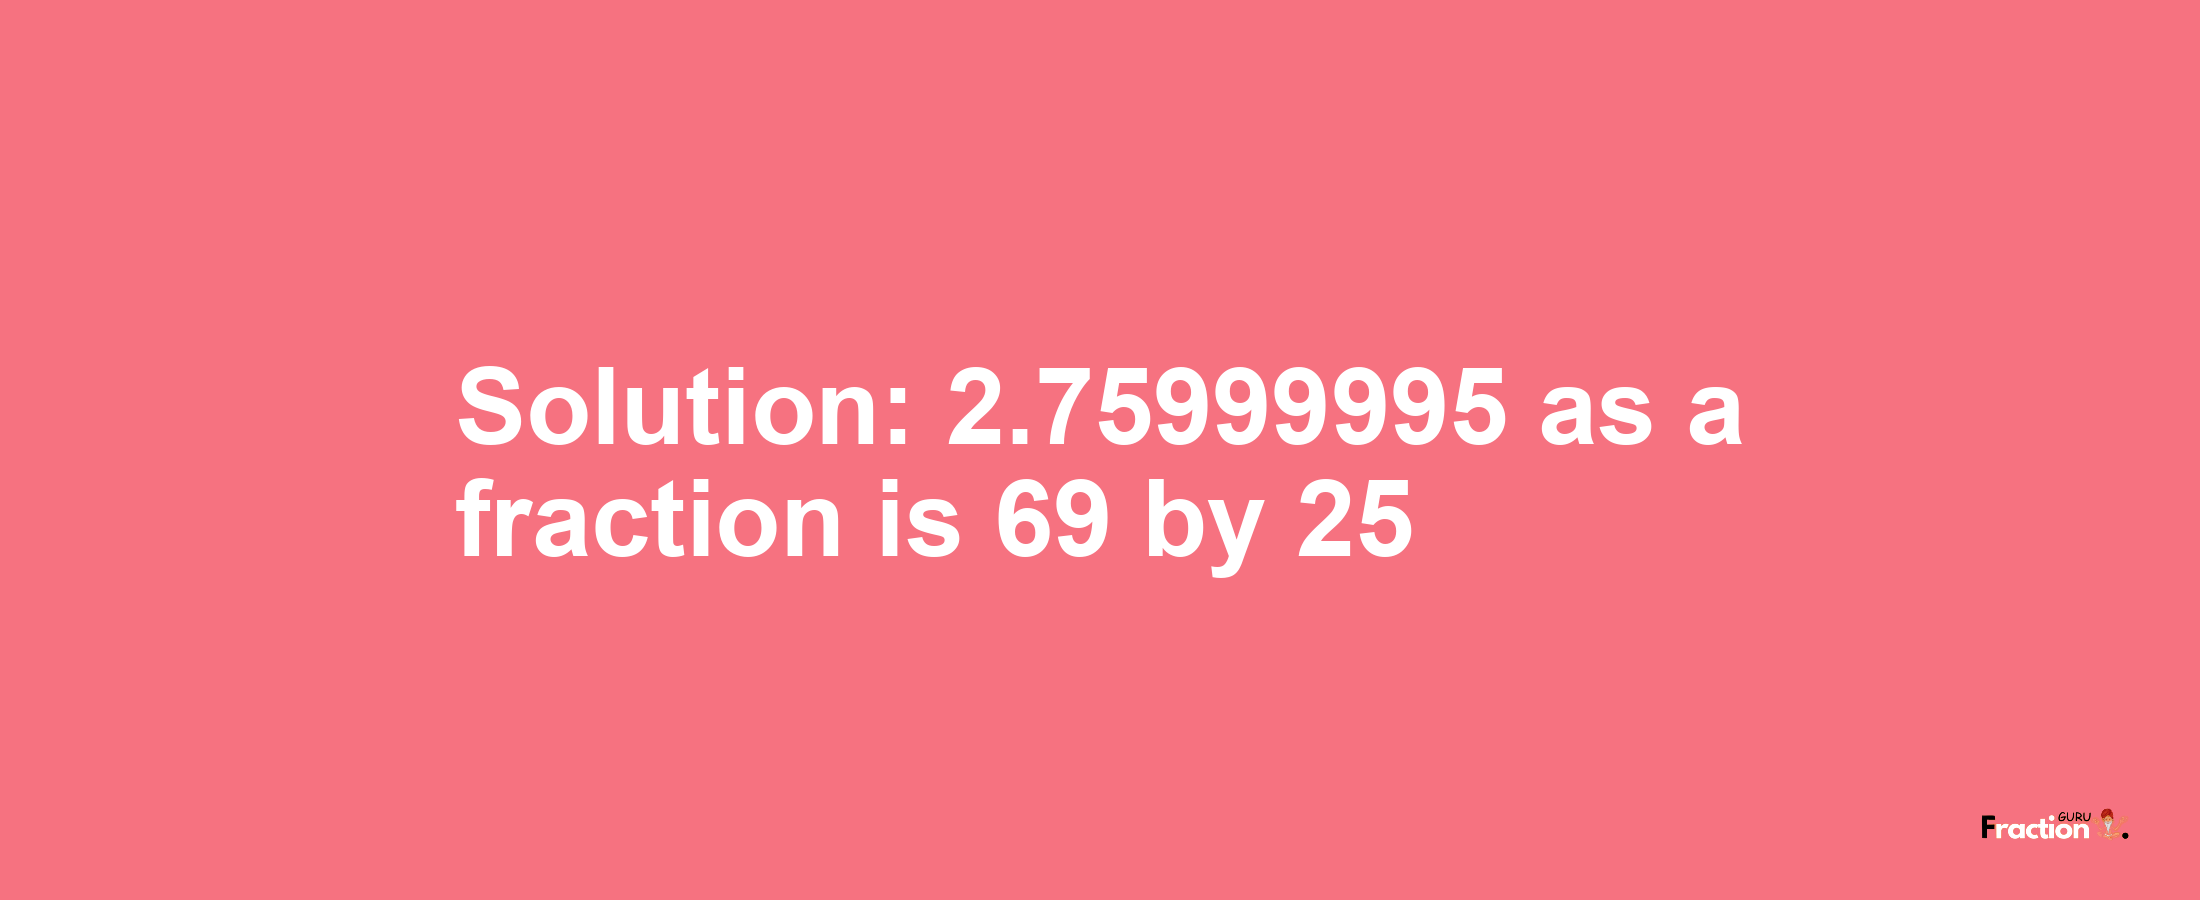 Solution:2.75999995 as a fraction is 69/25